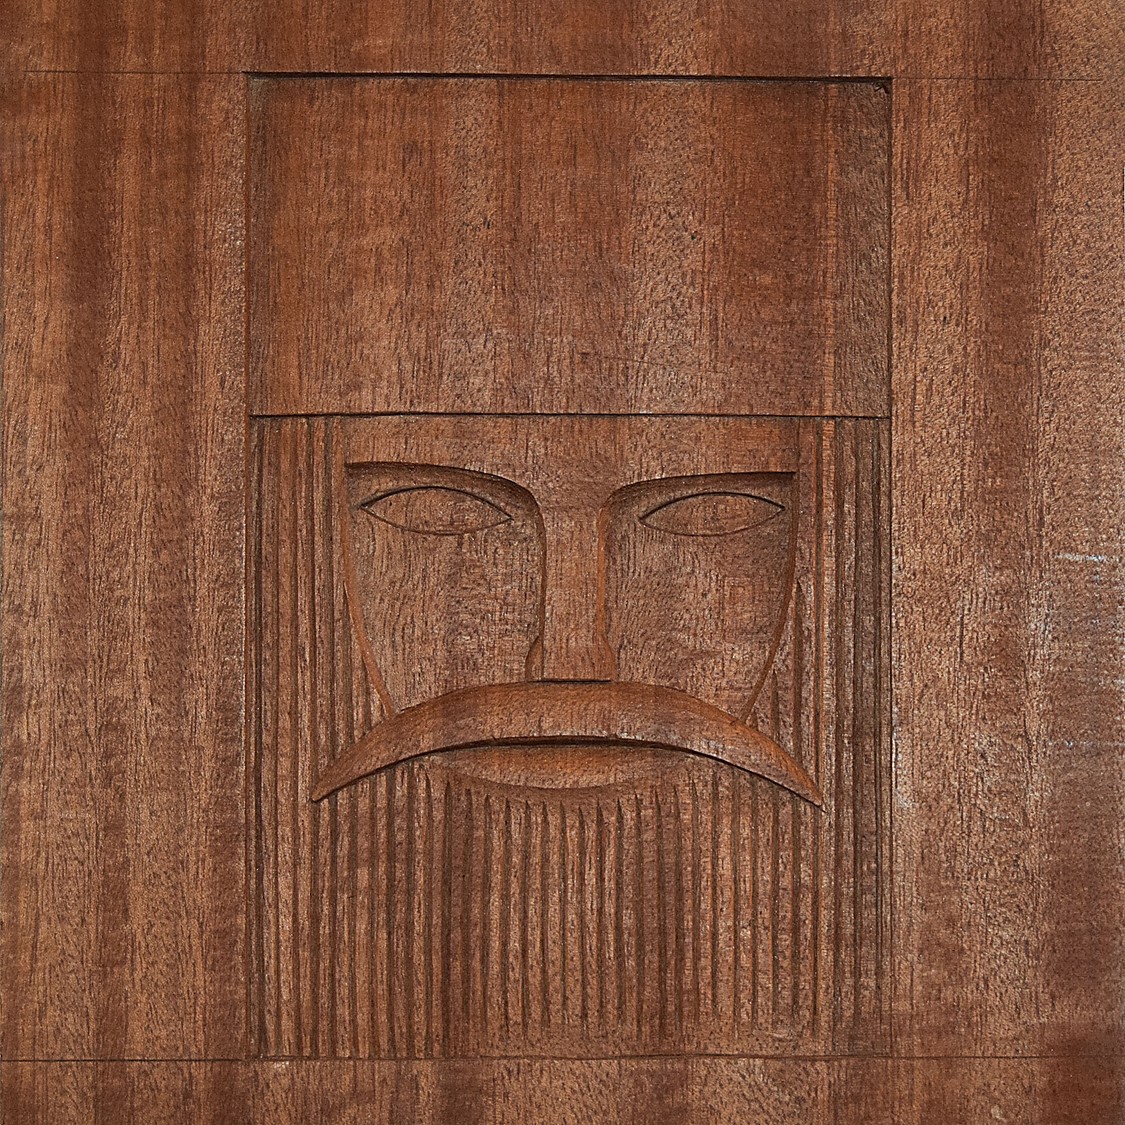 image of a carving in wood representing the head of a king